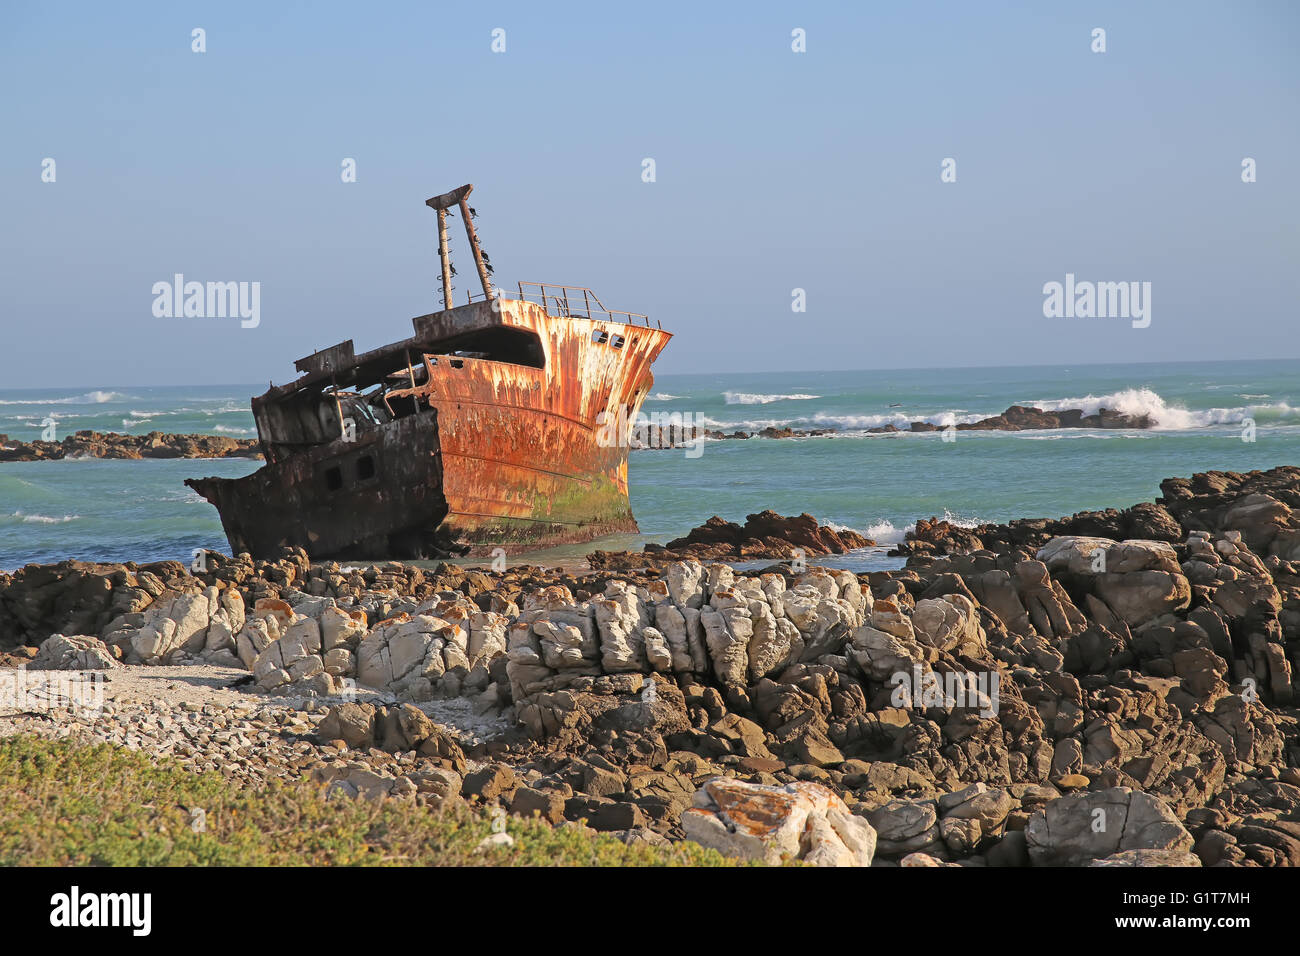 A shipwreck at Cape Agulhas, the most southern tip of African continent where Atlantic and Indian Oceans meet. Stock Photo